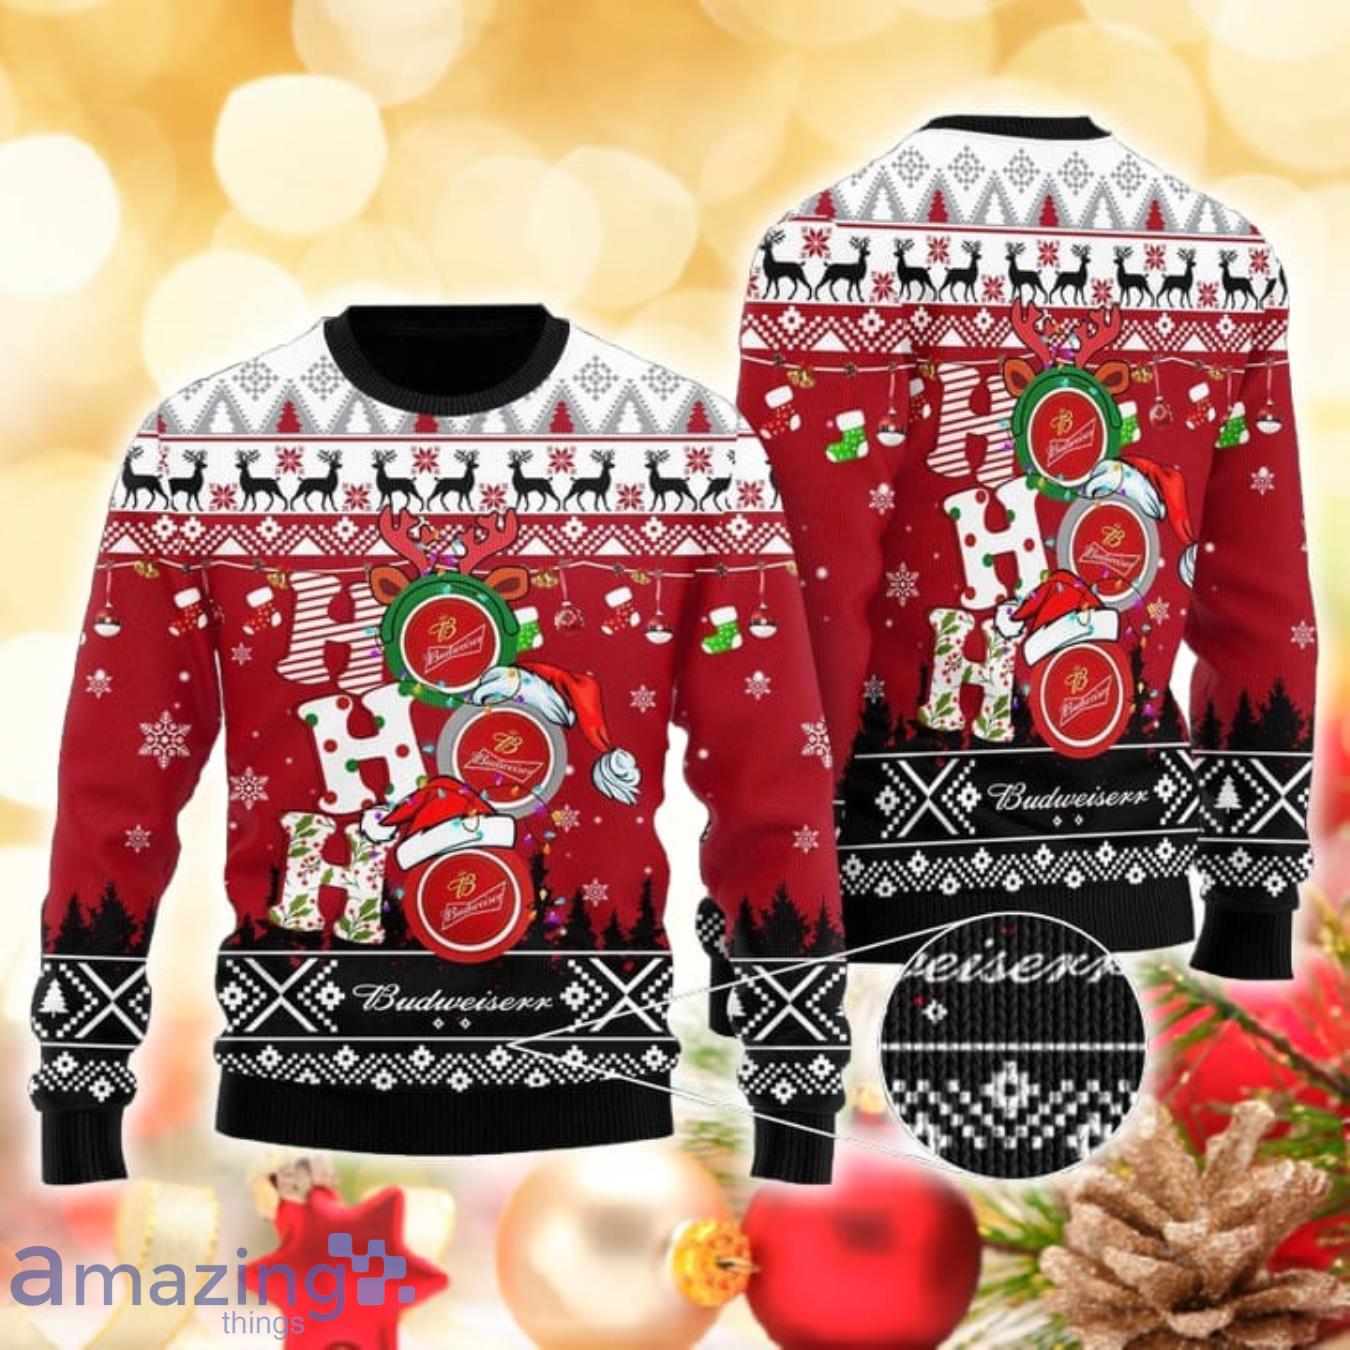 HoHoHo Budweiser Beer 3D Sweater Ugly Christmas Sweater For Men Women Product Photo 1